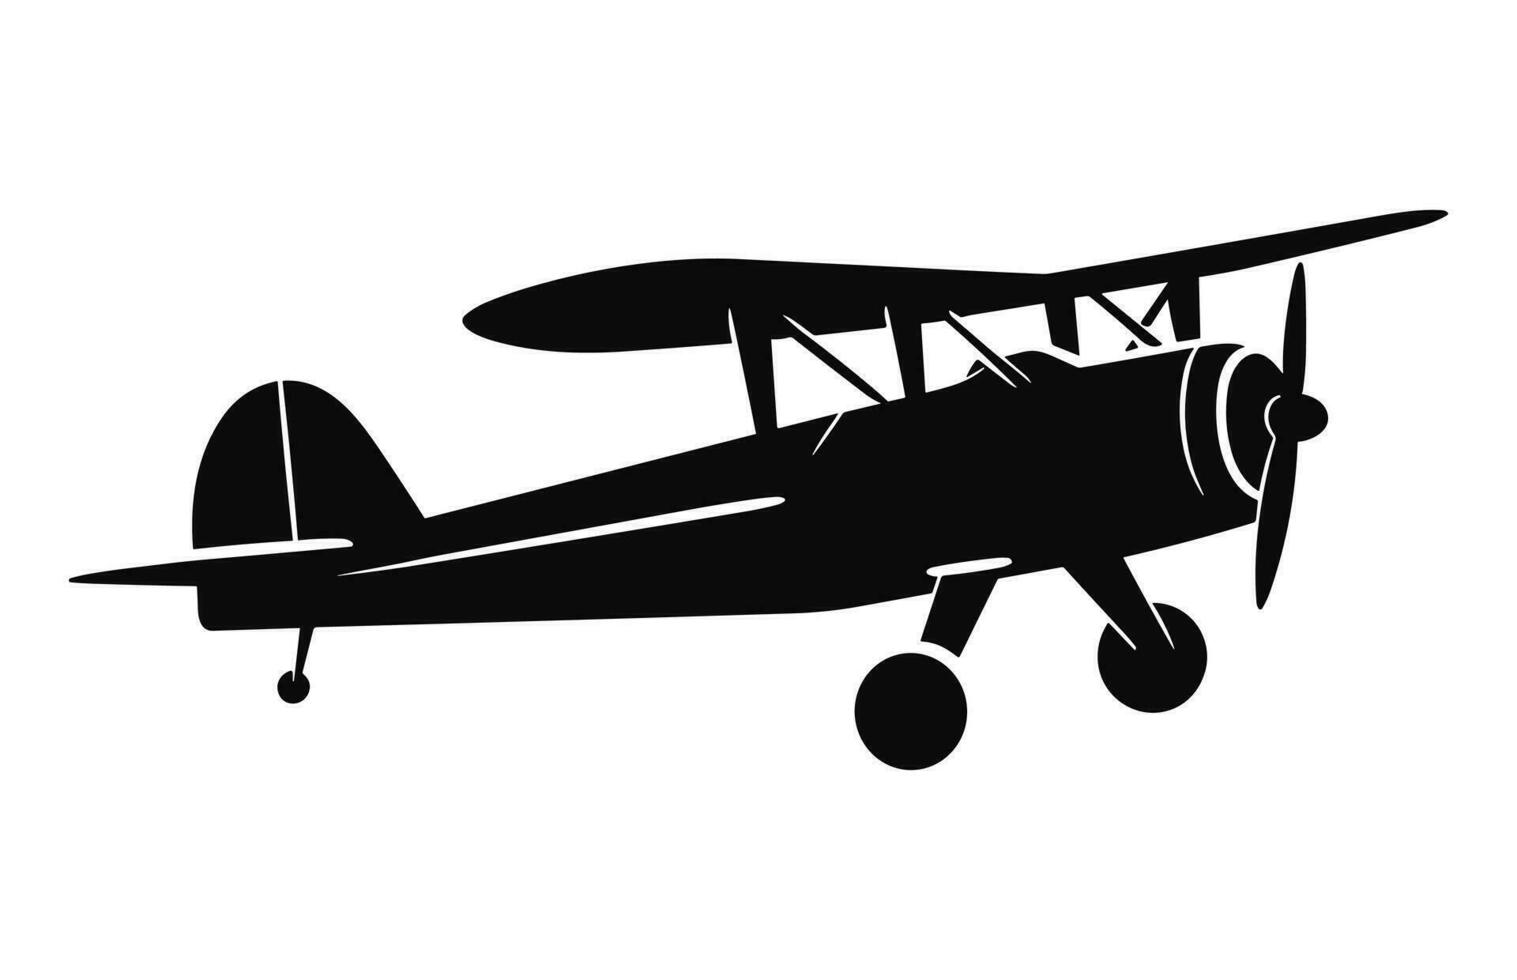 A Biplane Silhouette Clipart isolated on a white background, Airplane black vector design